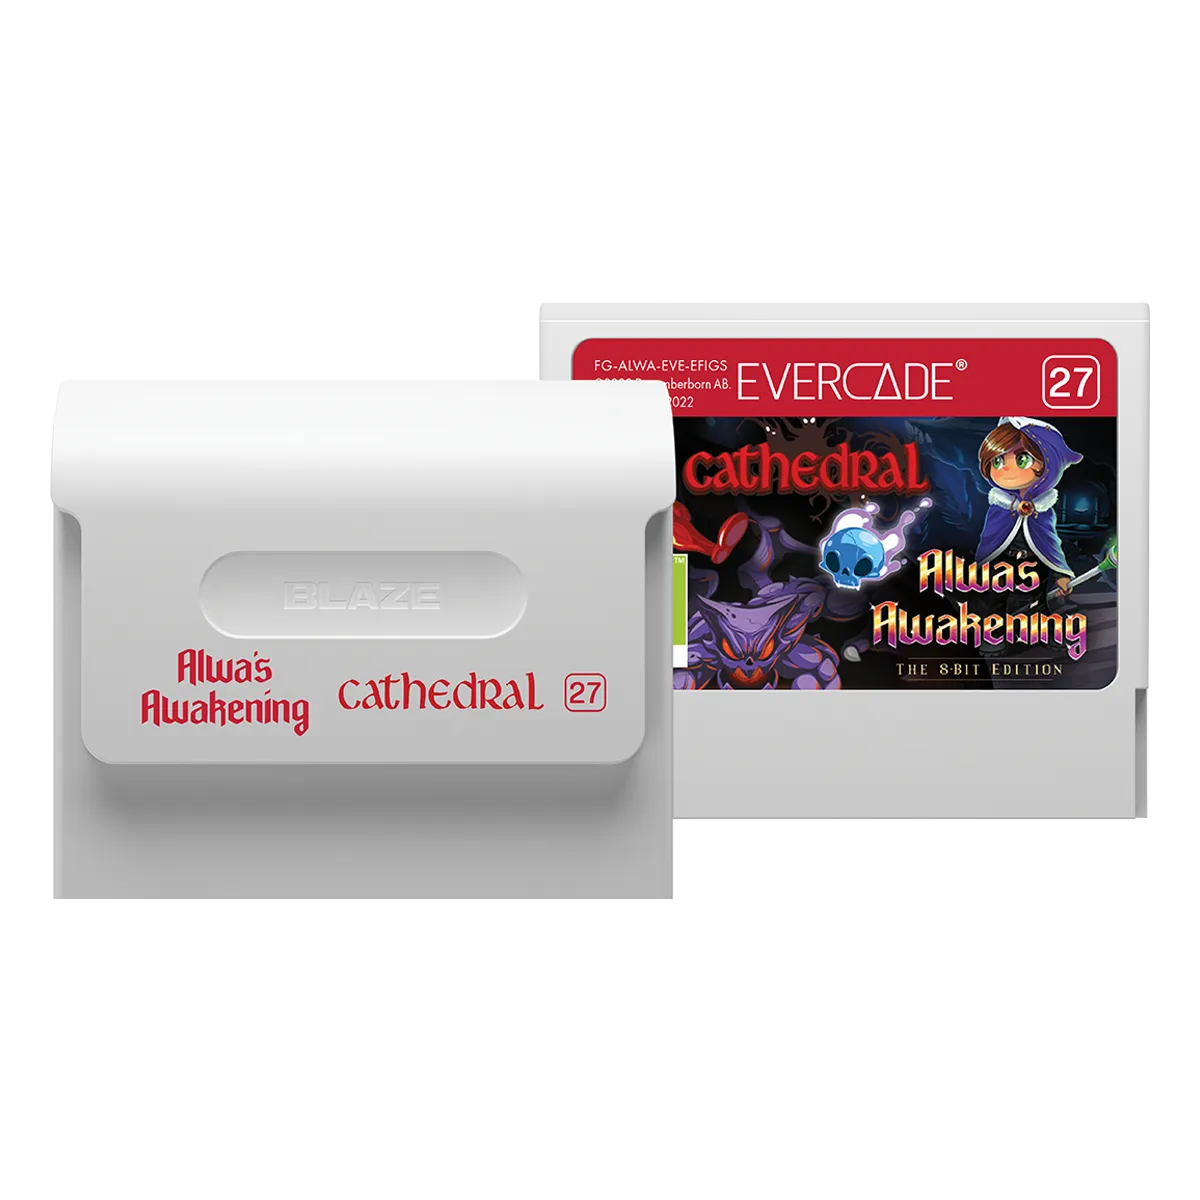 Blaze Evercade Alwa's/Cathedral Cartridge 27 - Red Collection Image 2